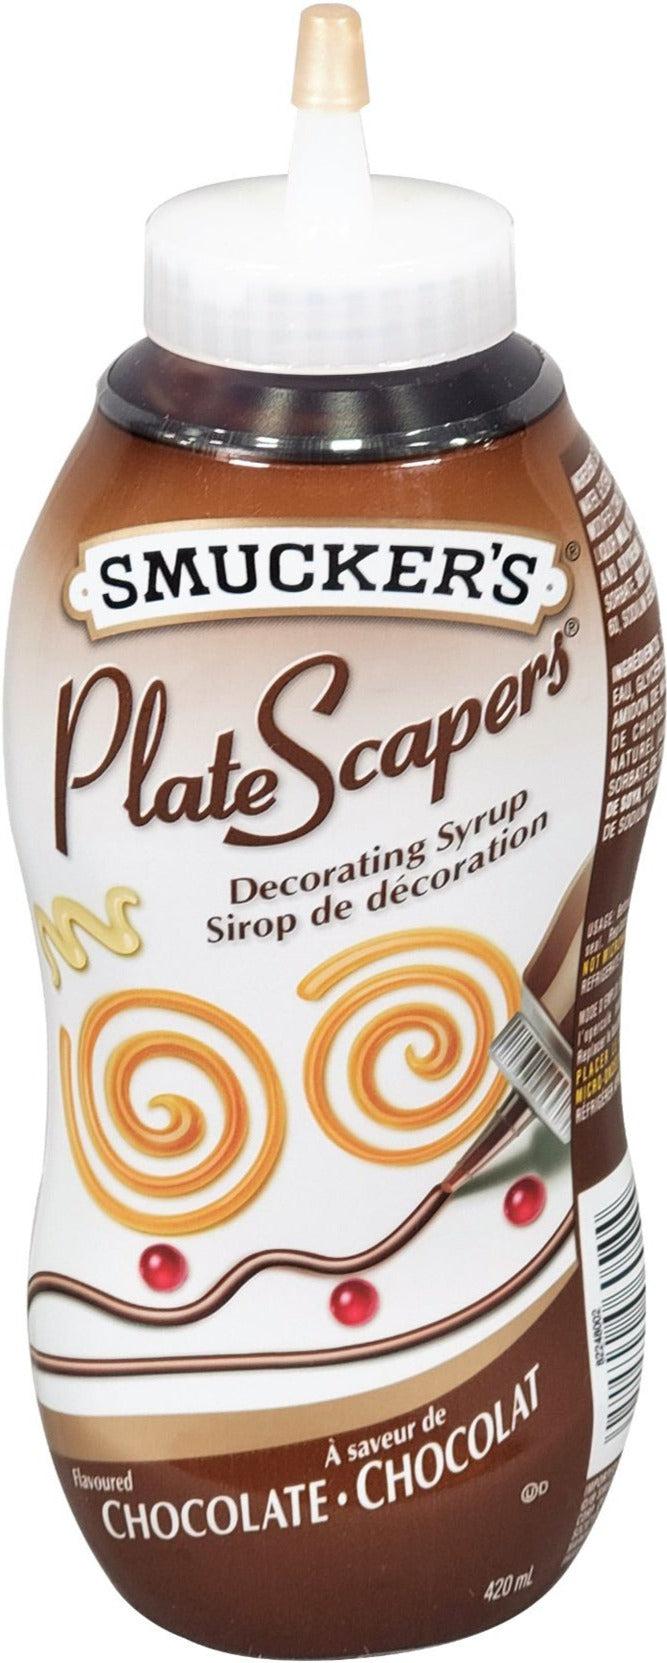 Smuckers - Plate Scapers - Chocolate Syrup